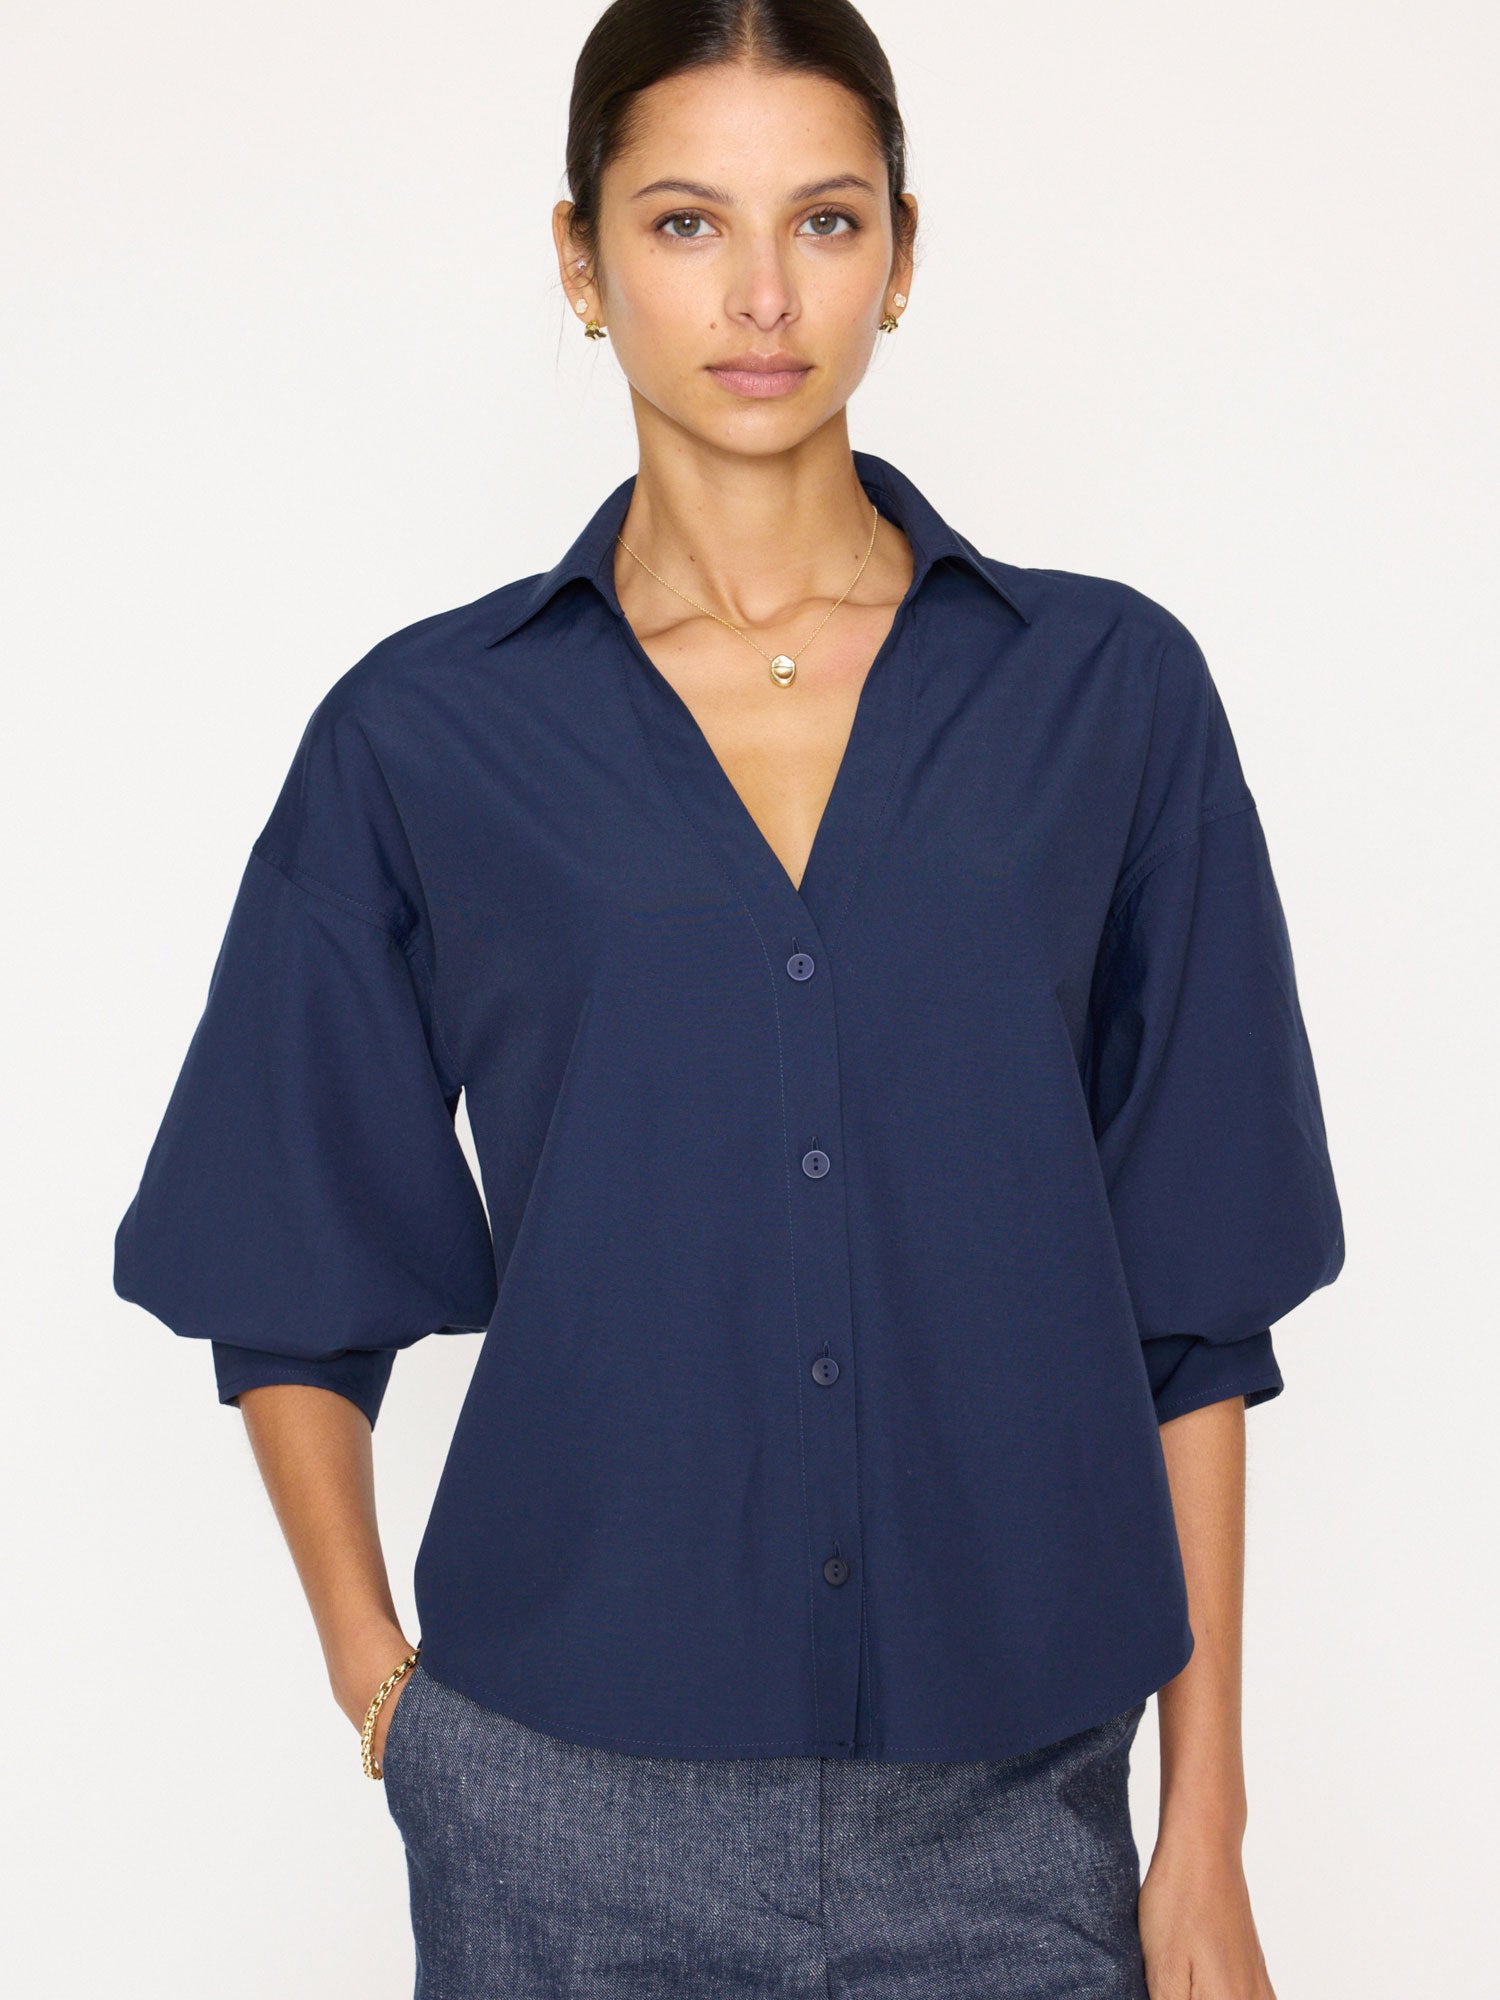 Kate V-neck button up navy shirt front view 2